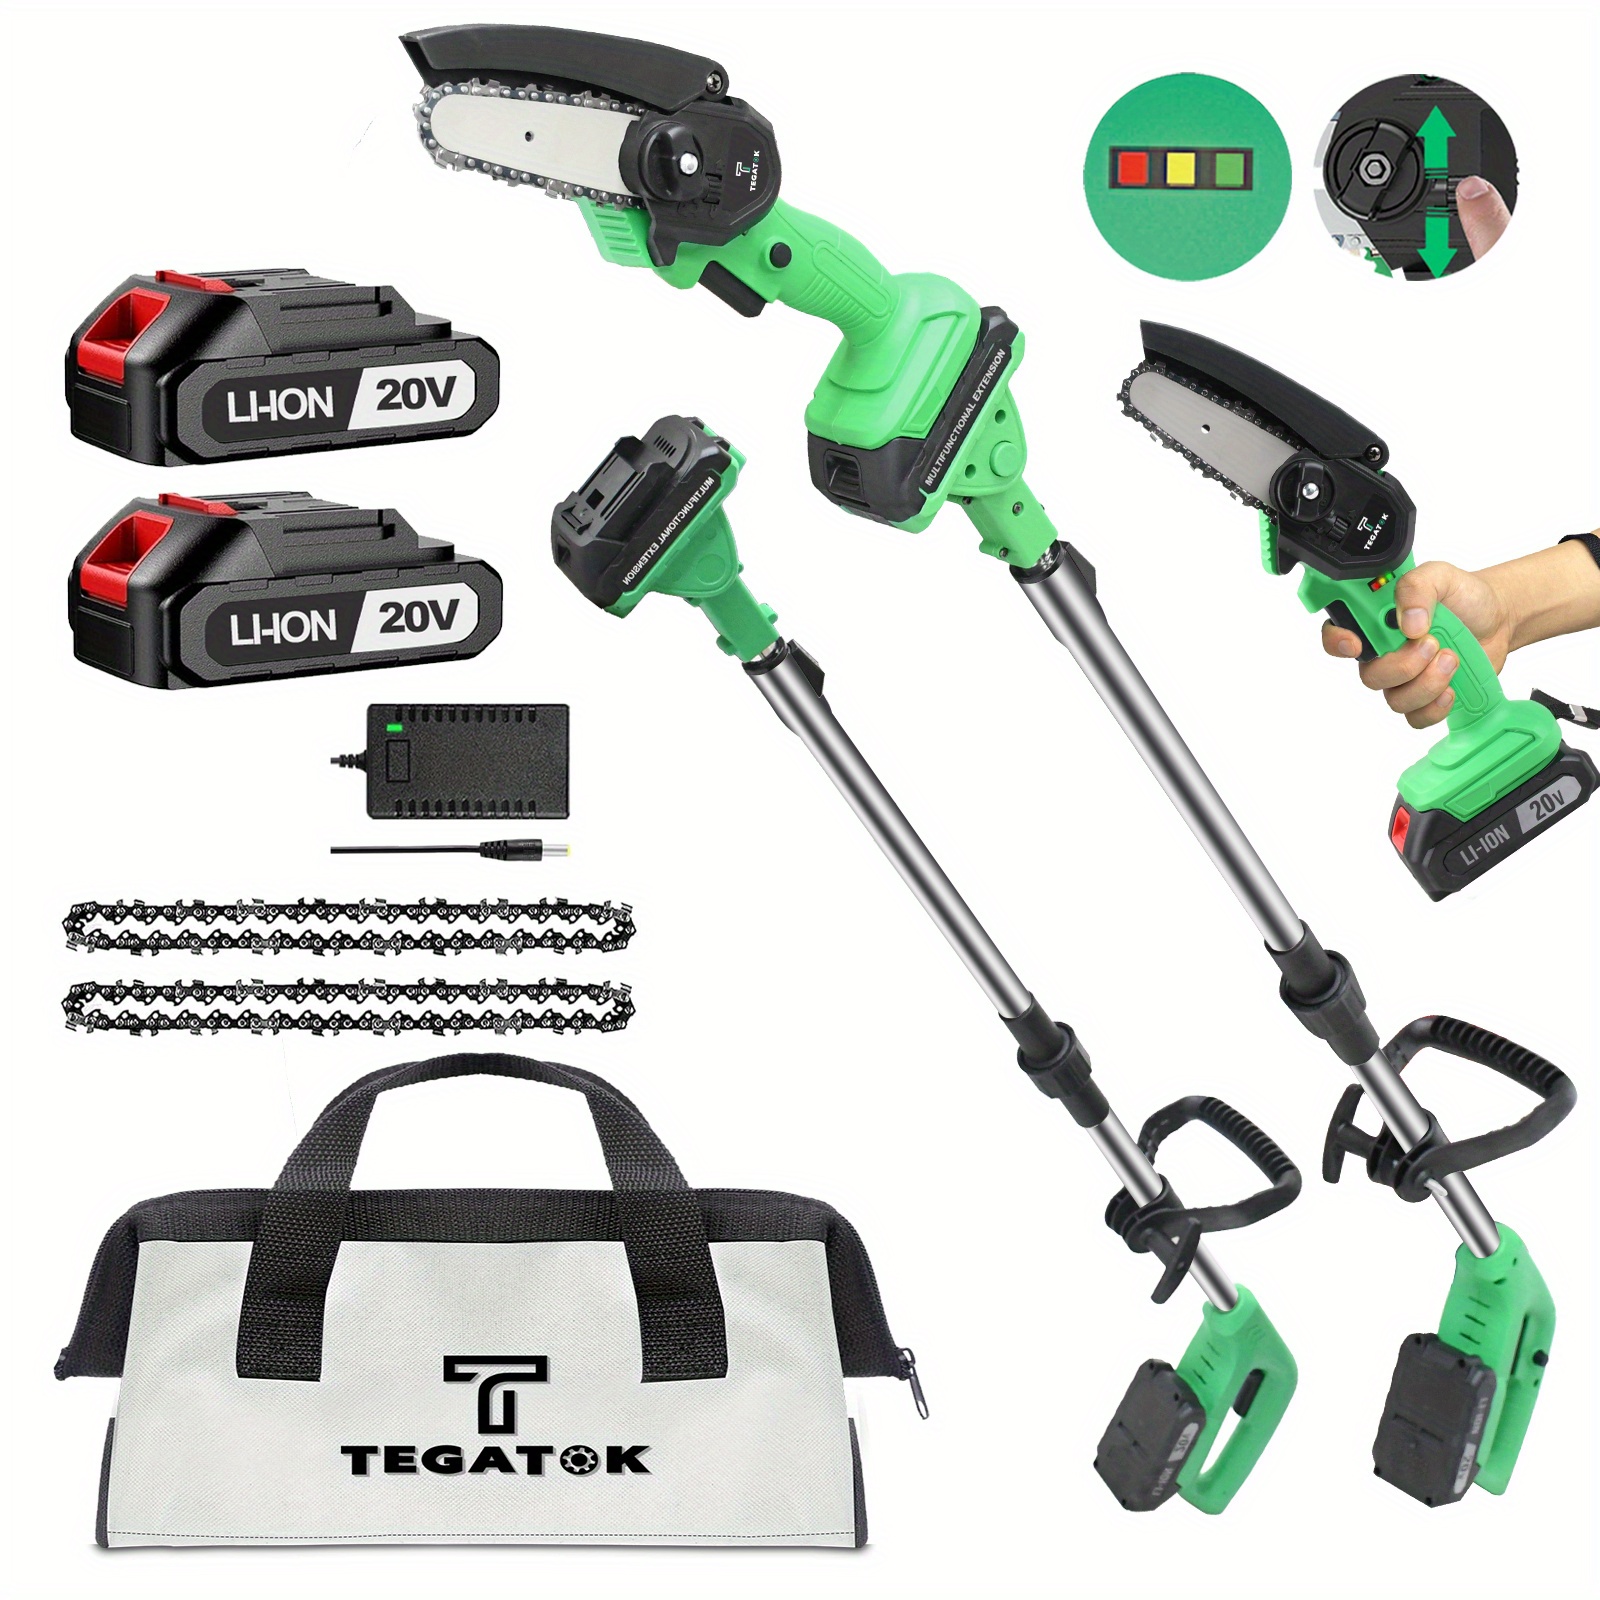 

Tegatok 2-in-1 Mini Chain Saw, With 5.5 Ft Extendable Rod, 2 Batteries And , Cordless Pole Saw, Small Handheld Portable Chainsaw Battery Powered Chain Saw For Cutting Wood Trimming And Woodworking